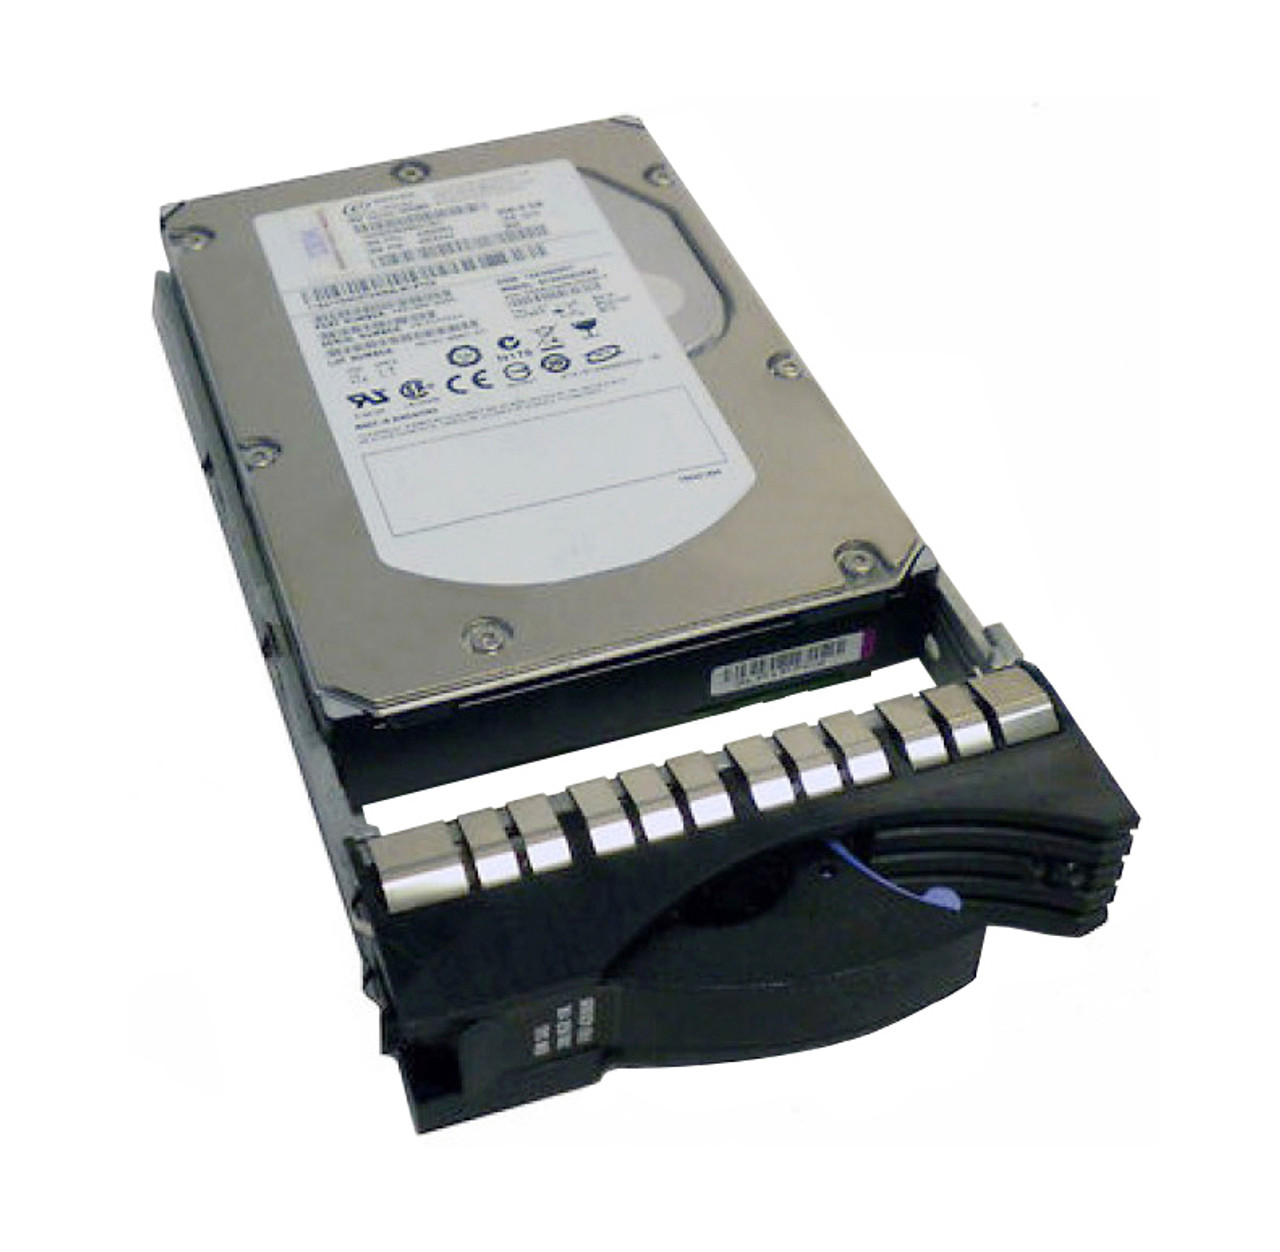 03T7866 Lenovo 2TB 7200RPM SATA 6Gbps Hot Swap 128MB Cache 3.5-inch Internal Hard Drive for ThinkServer RD650 and RD550